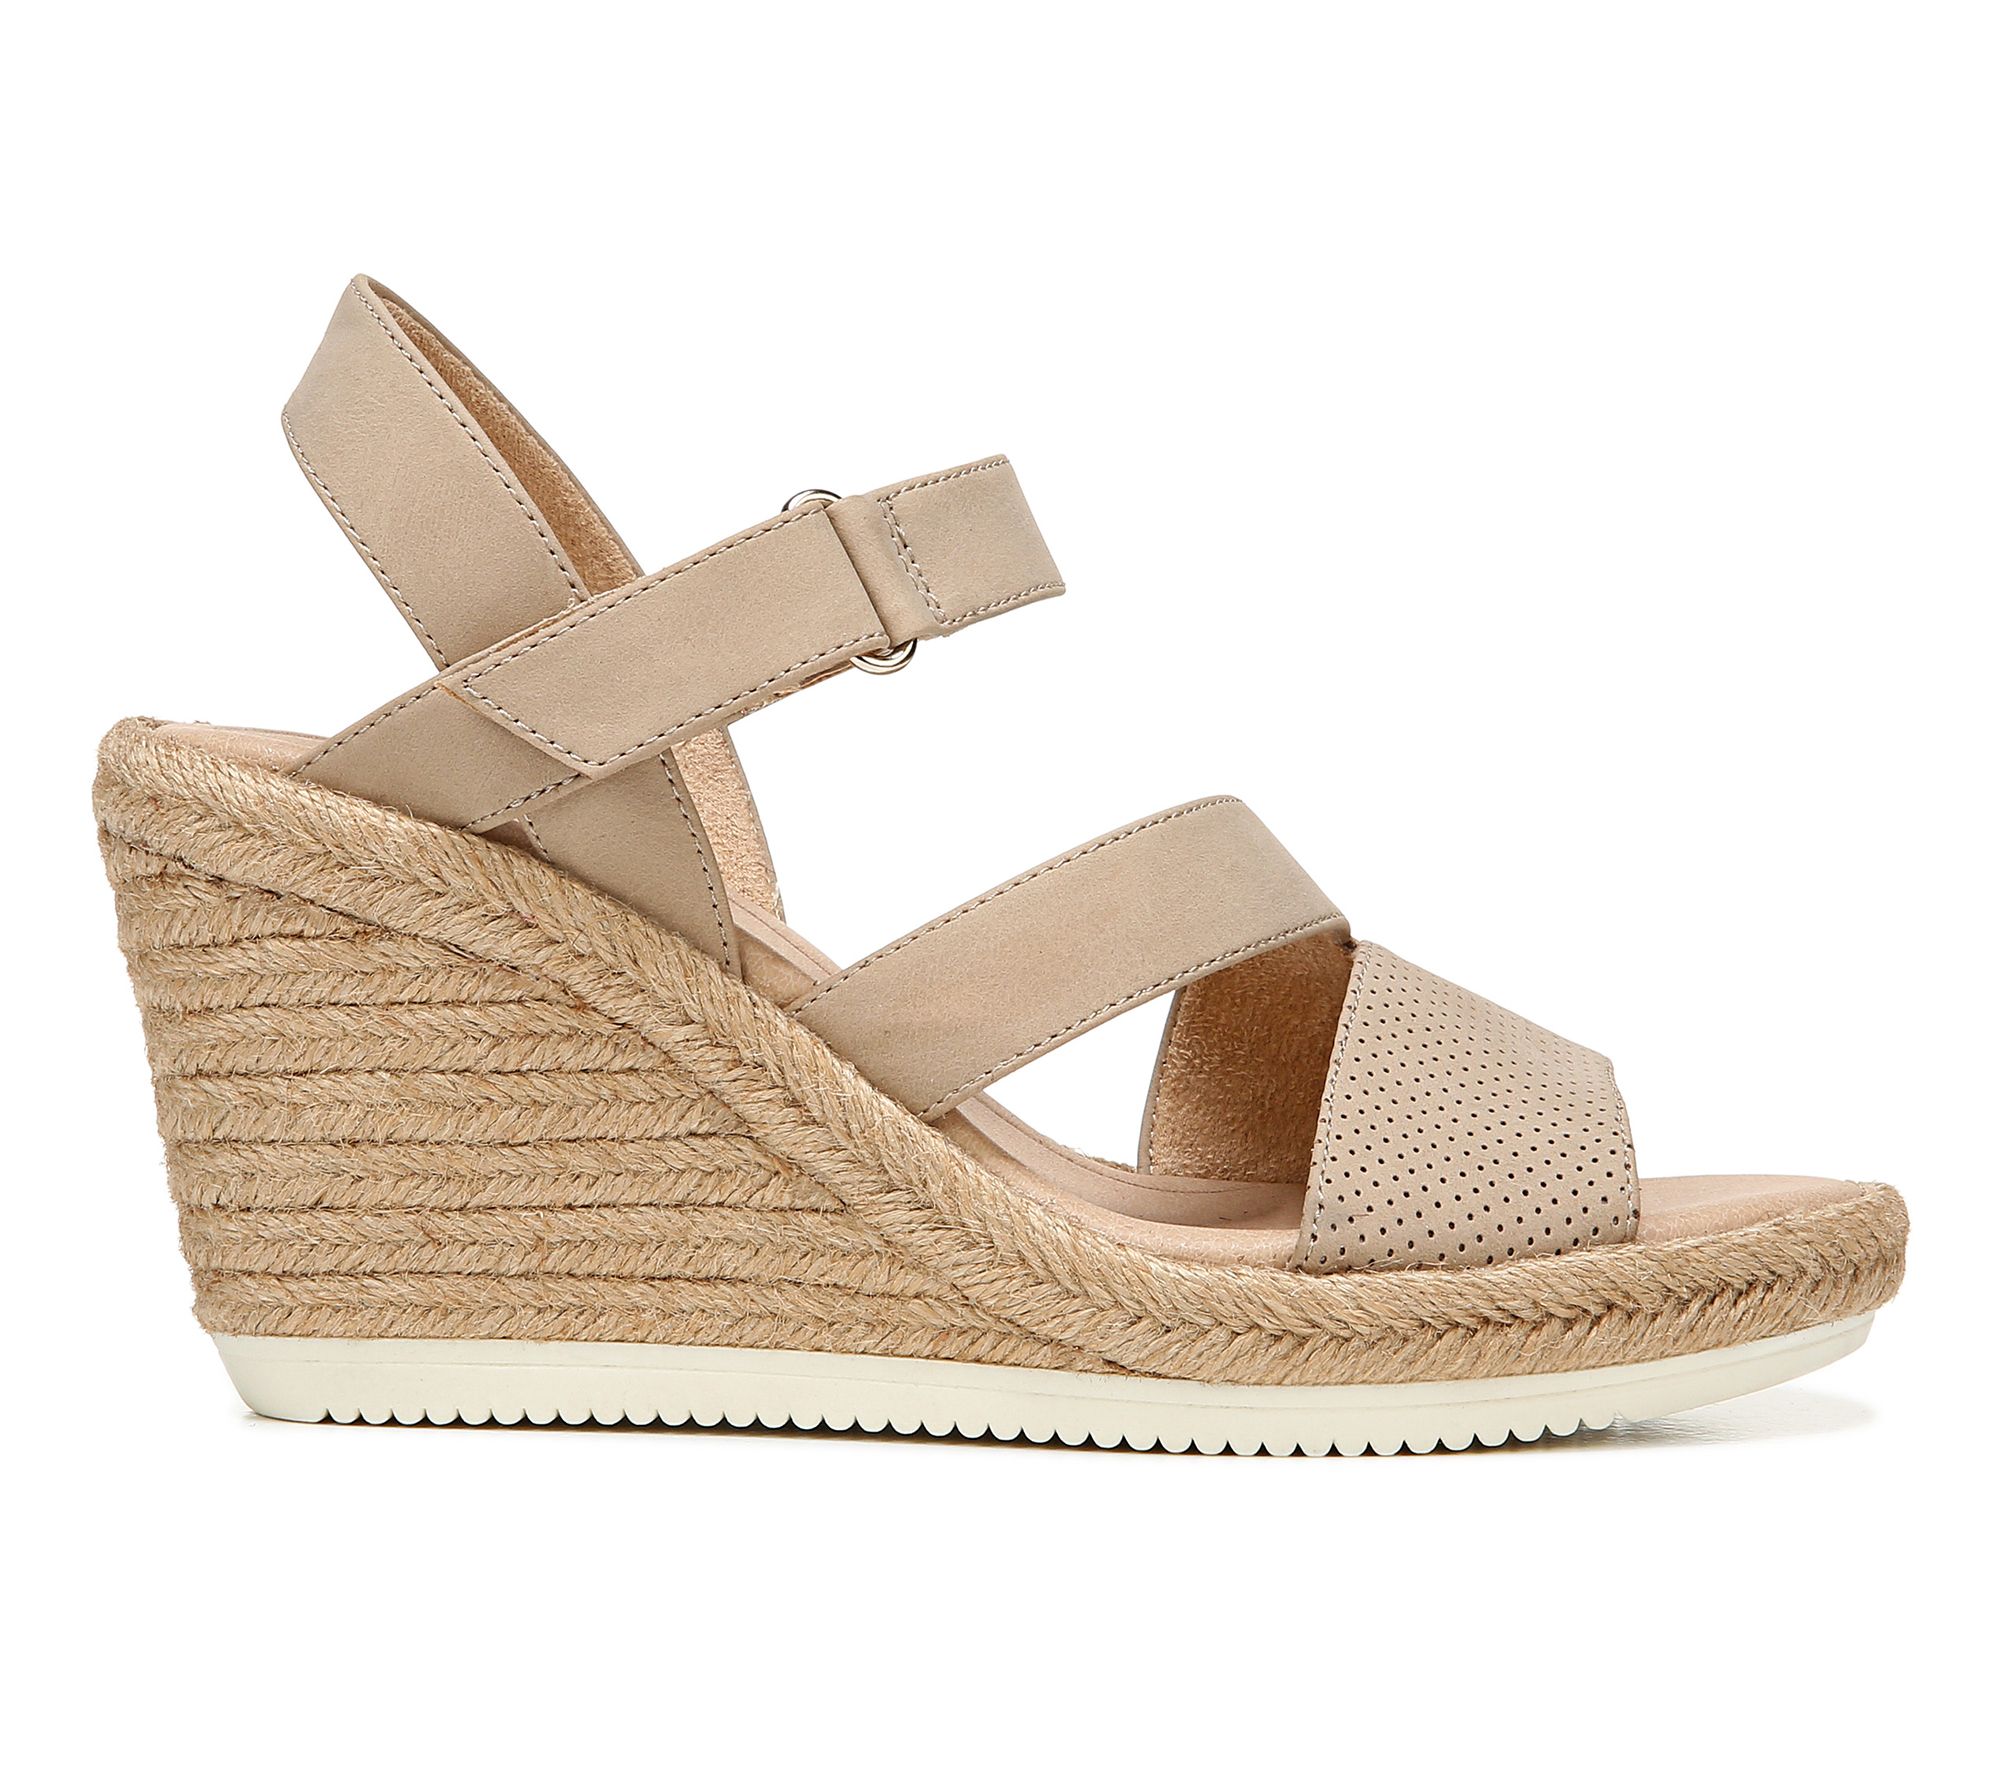 Dr. Scholl's Strappy Espadrille Wedges - Vanity - QVC.com